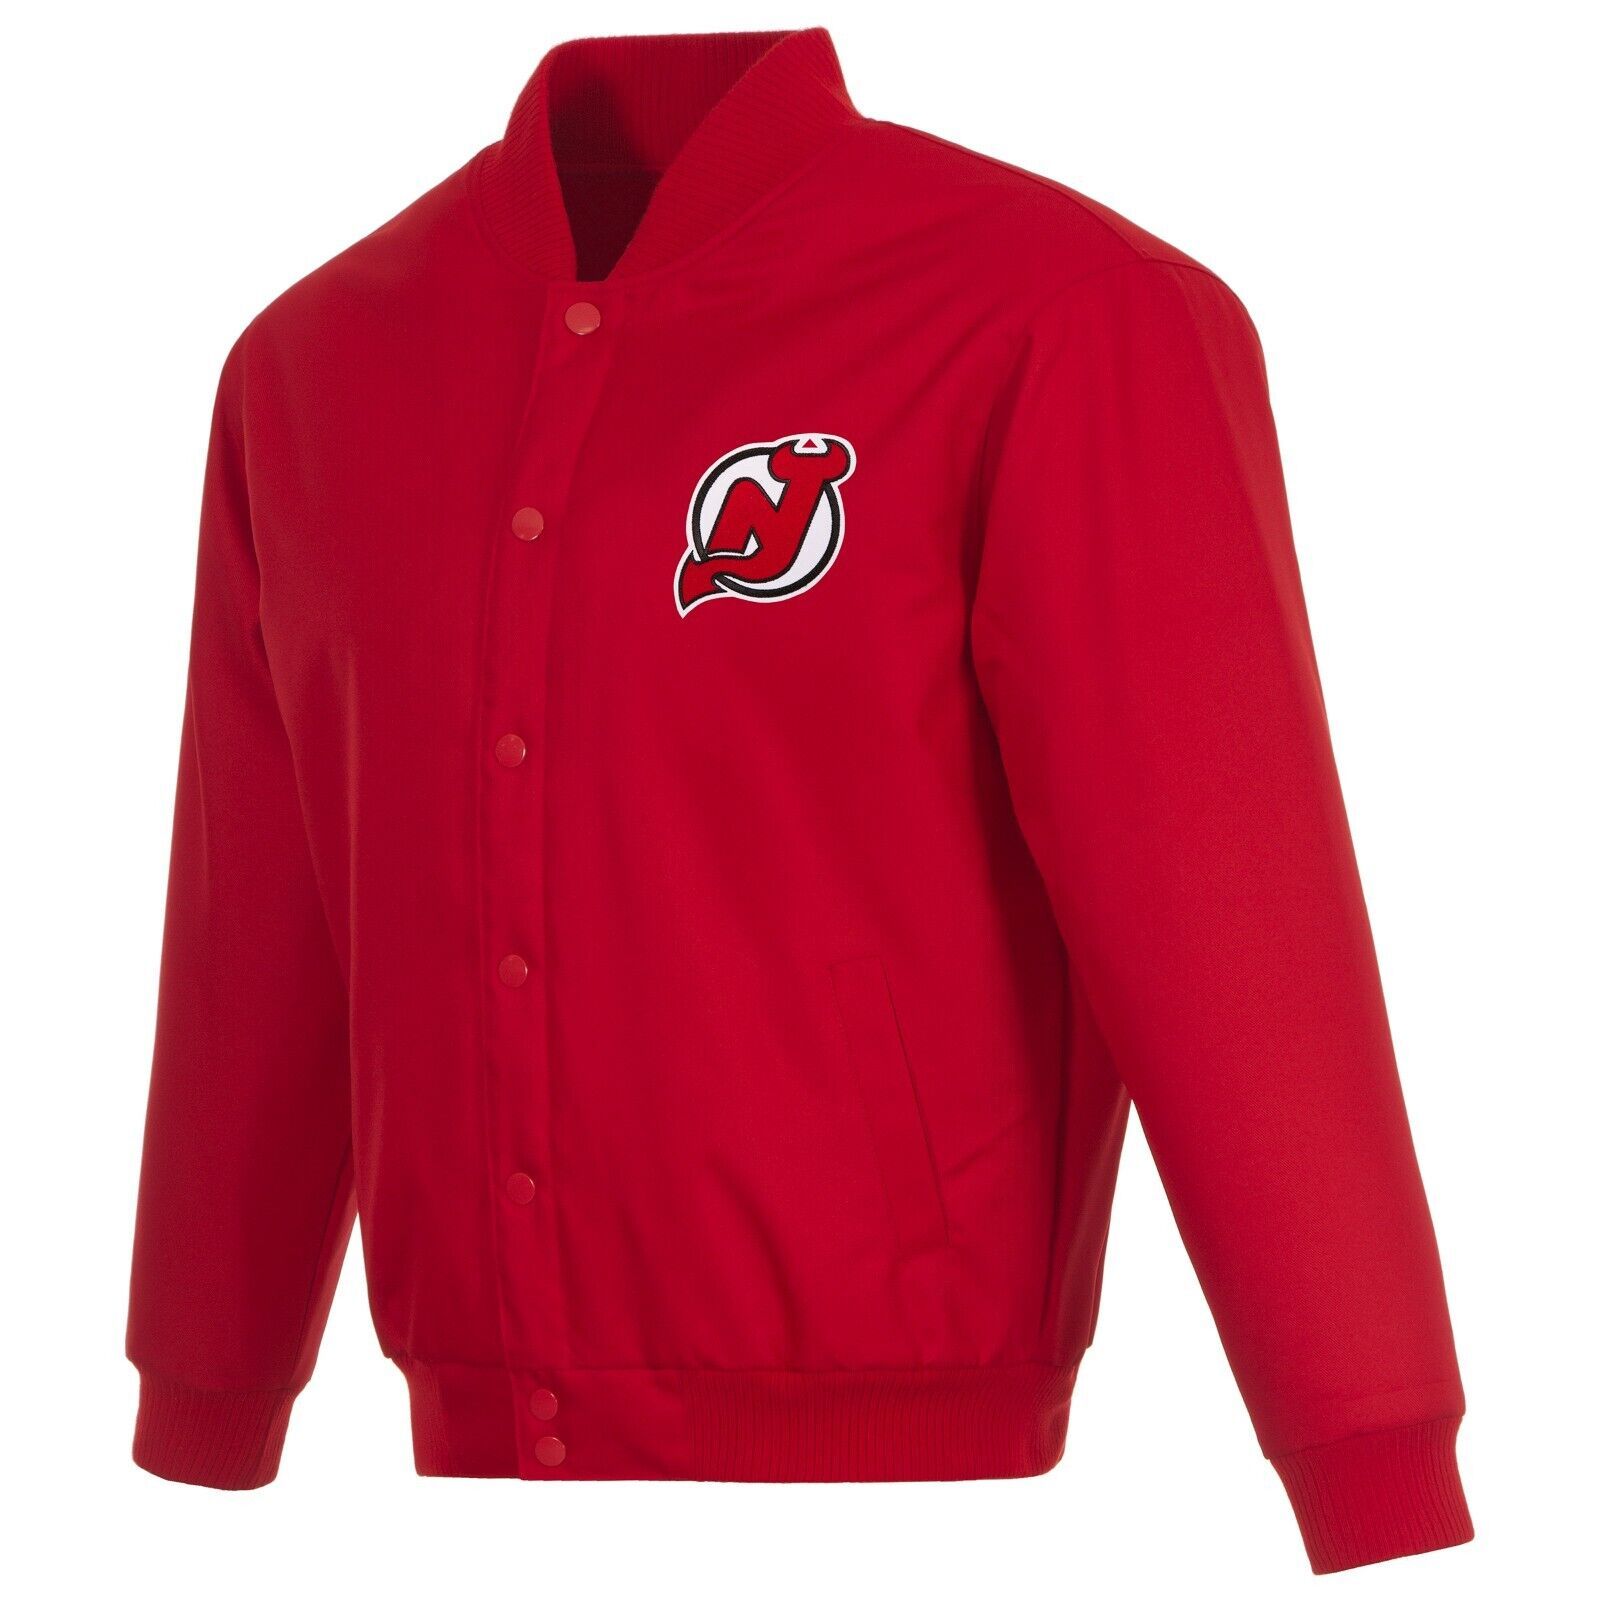 Primary image for NHL New Jersey Devils Poly Twill Jacket Embroidered Patches Logo JH Design Red